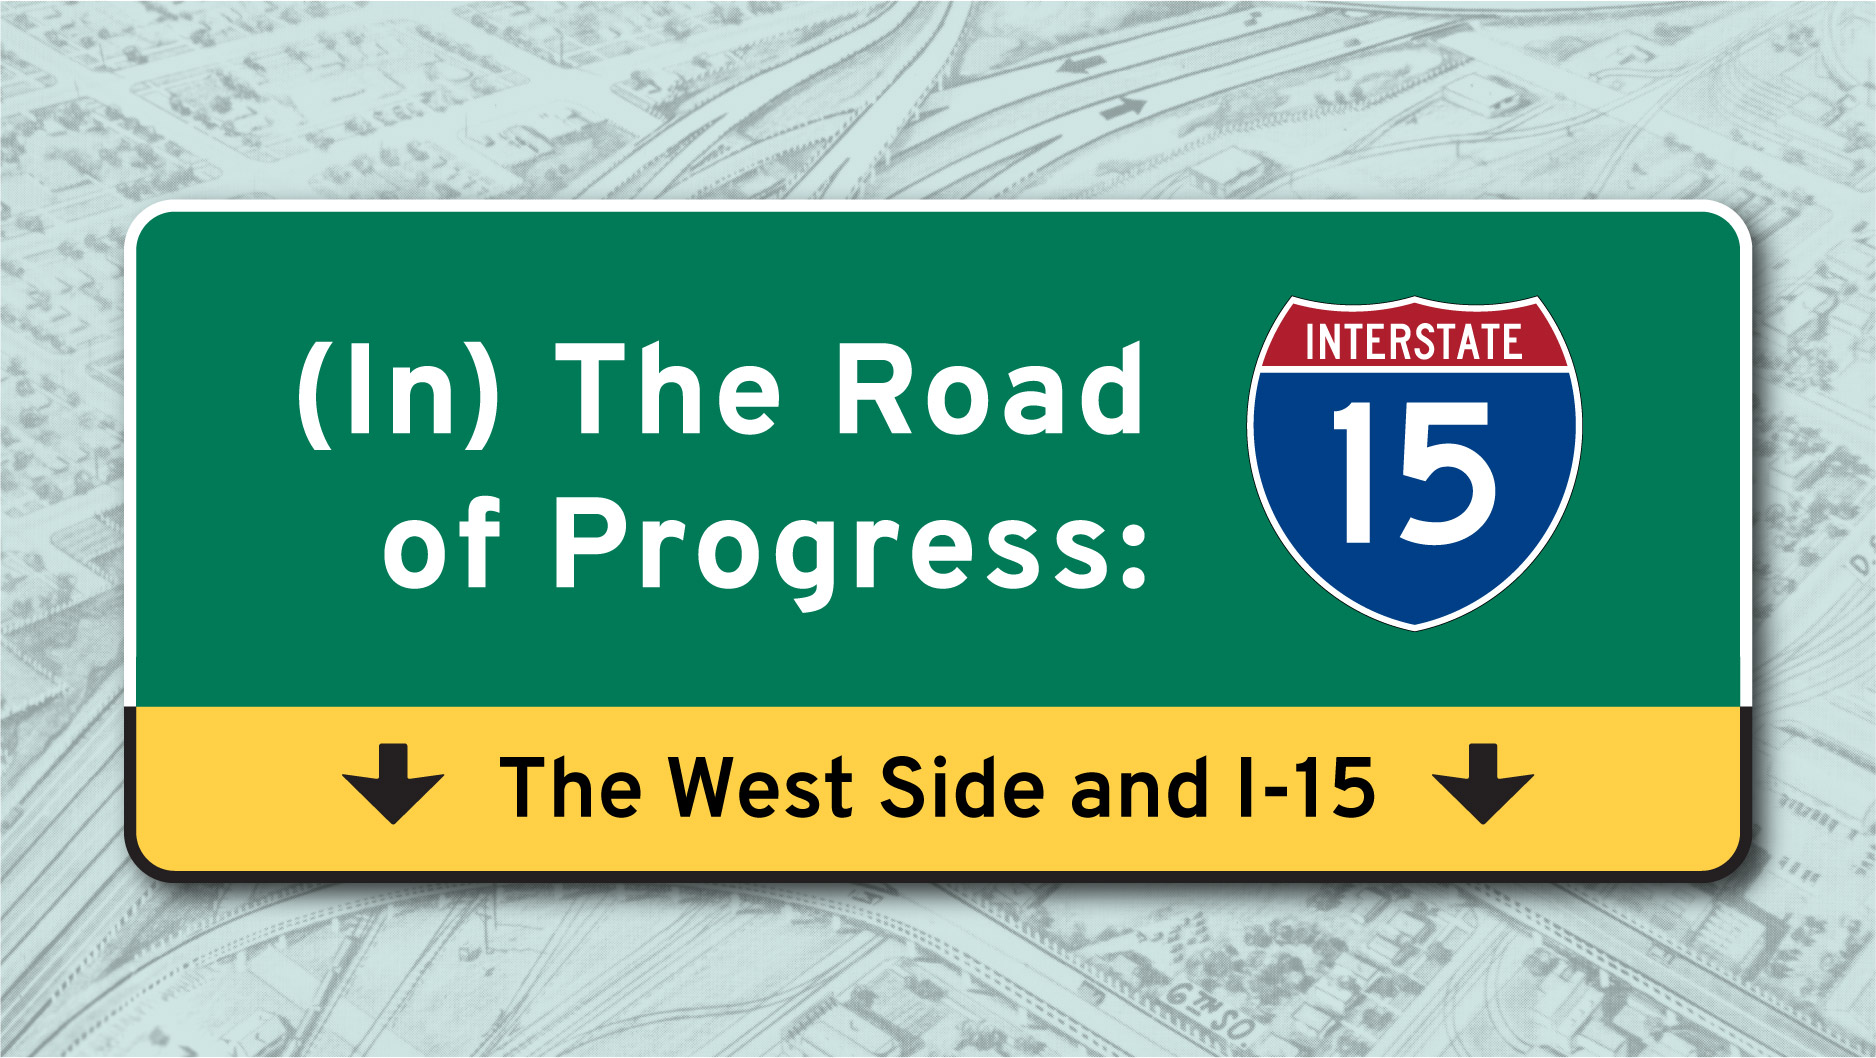 (In) The Road of Progress: The West Side and I-15